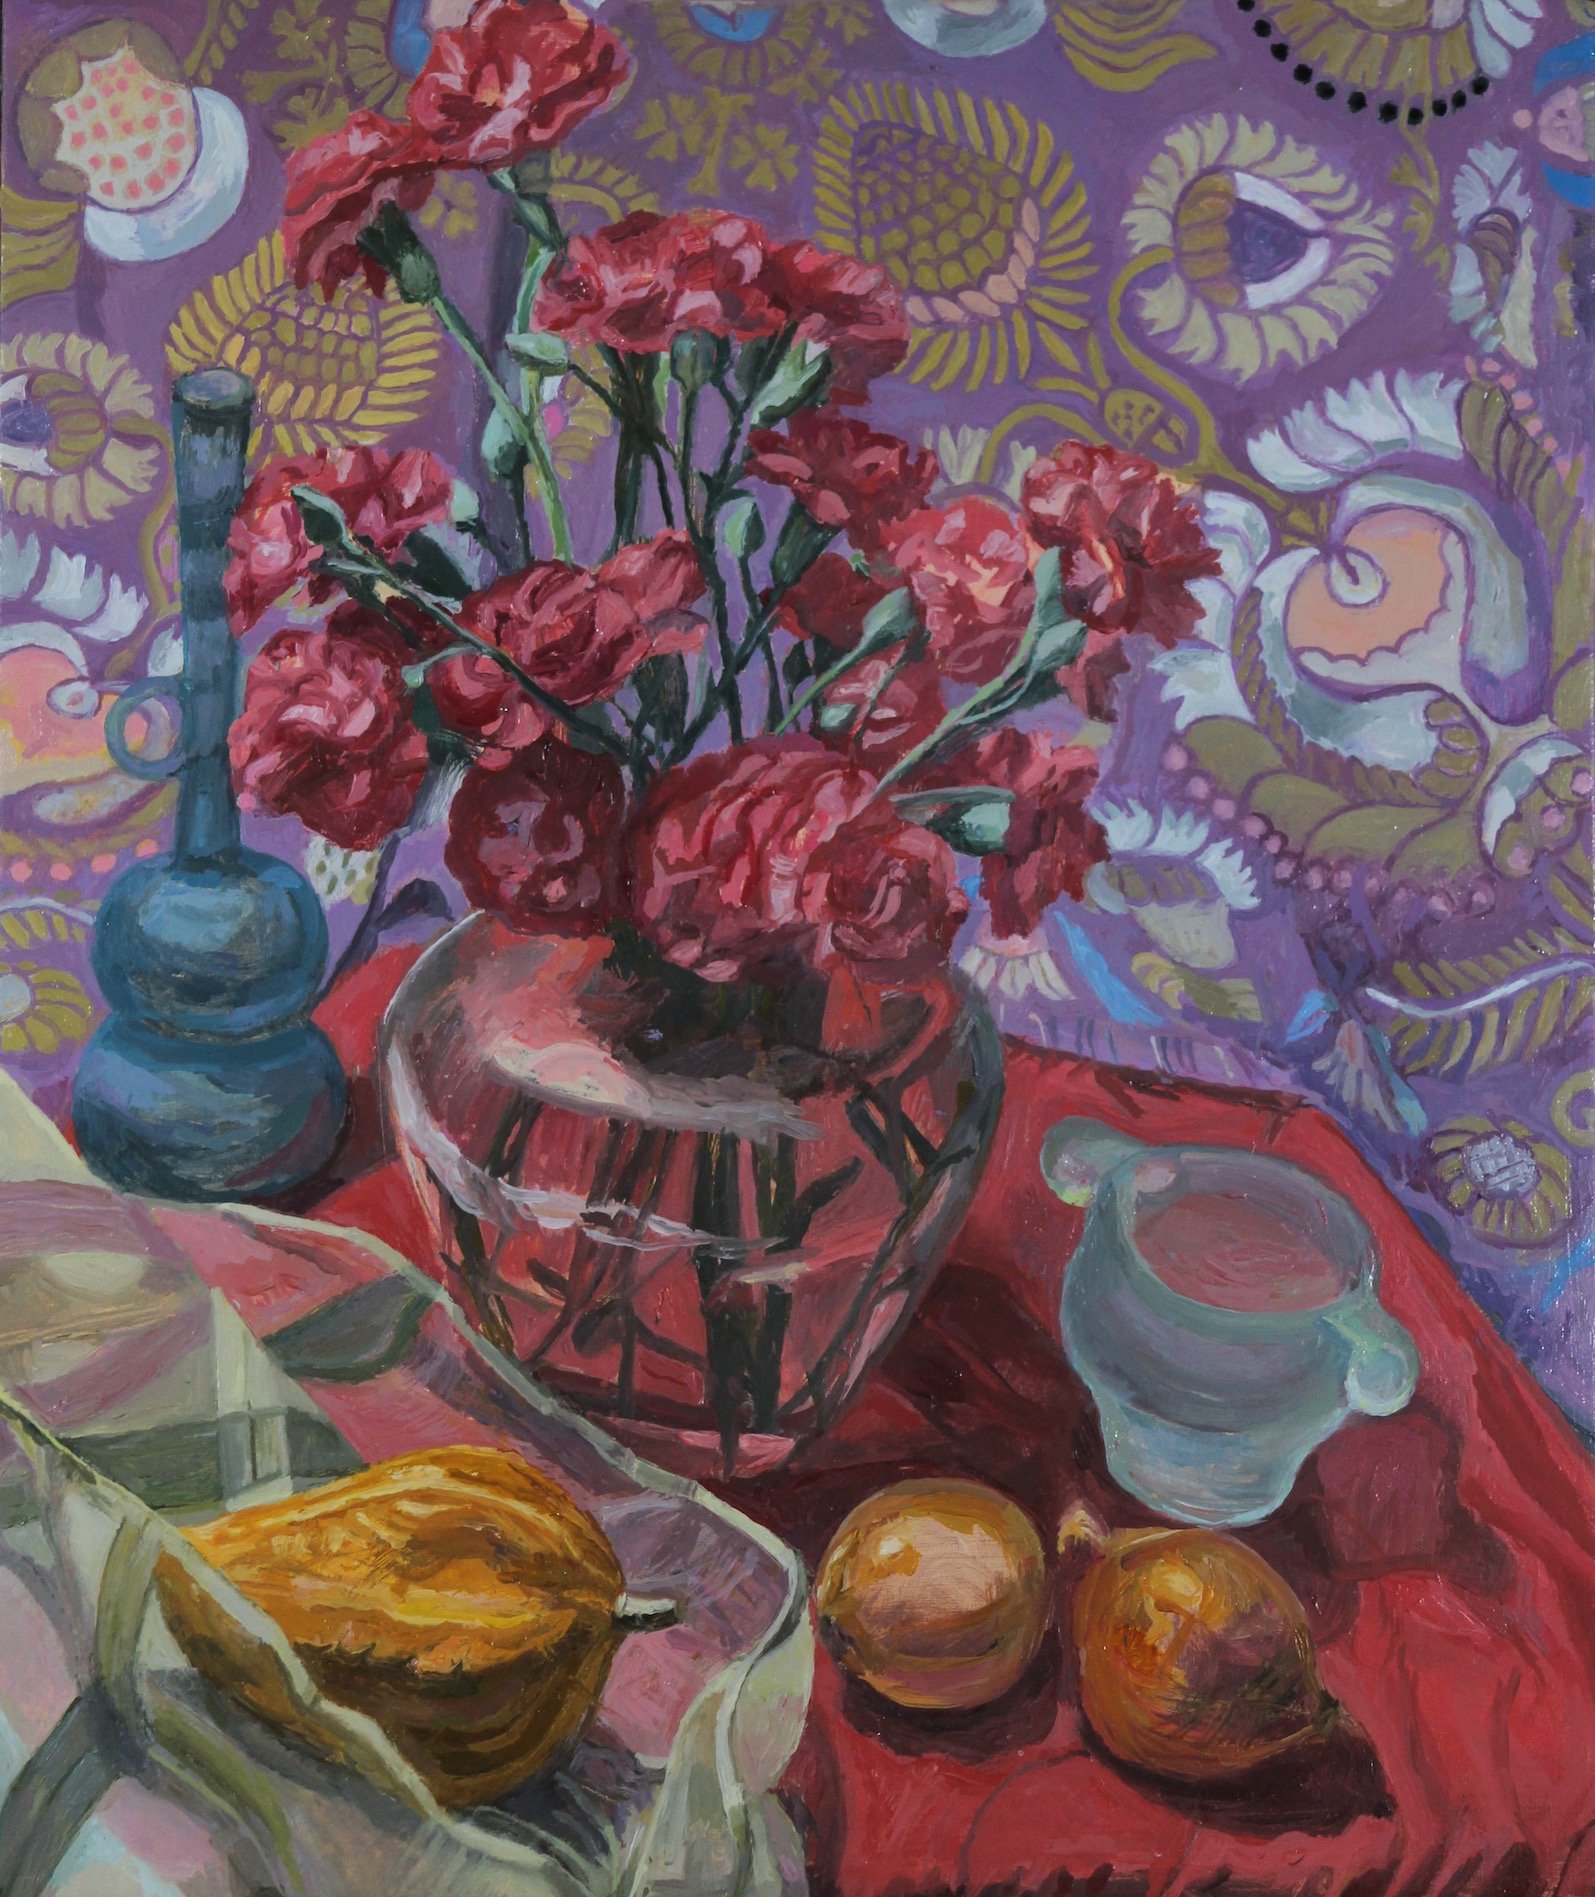     Still Life with Red Carnations